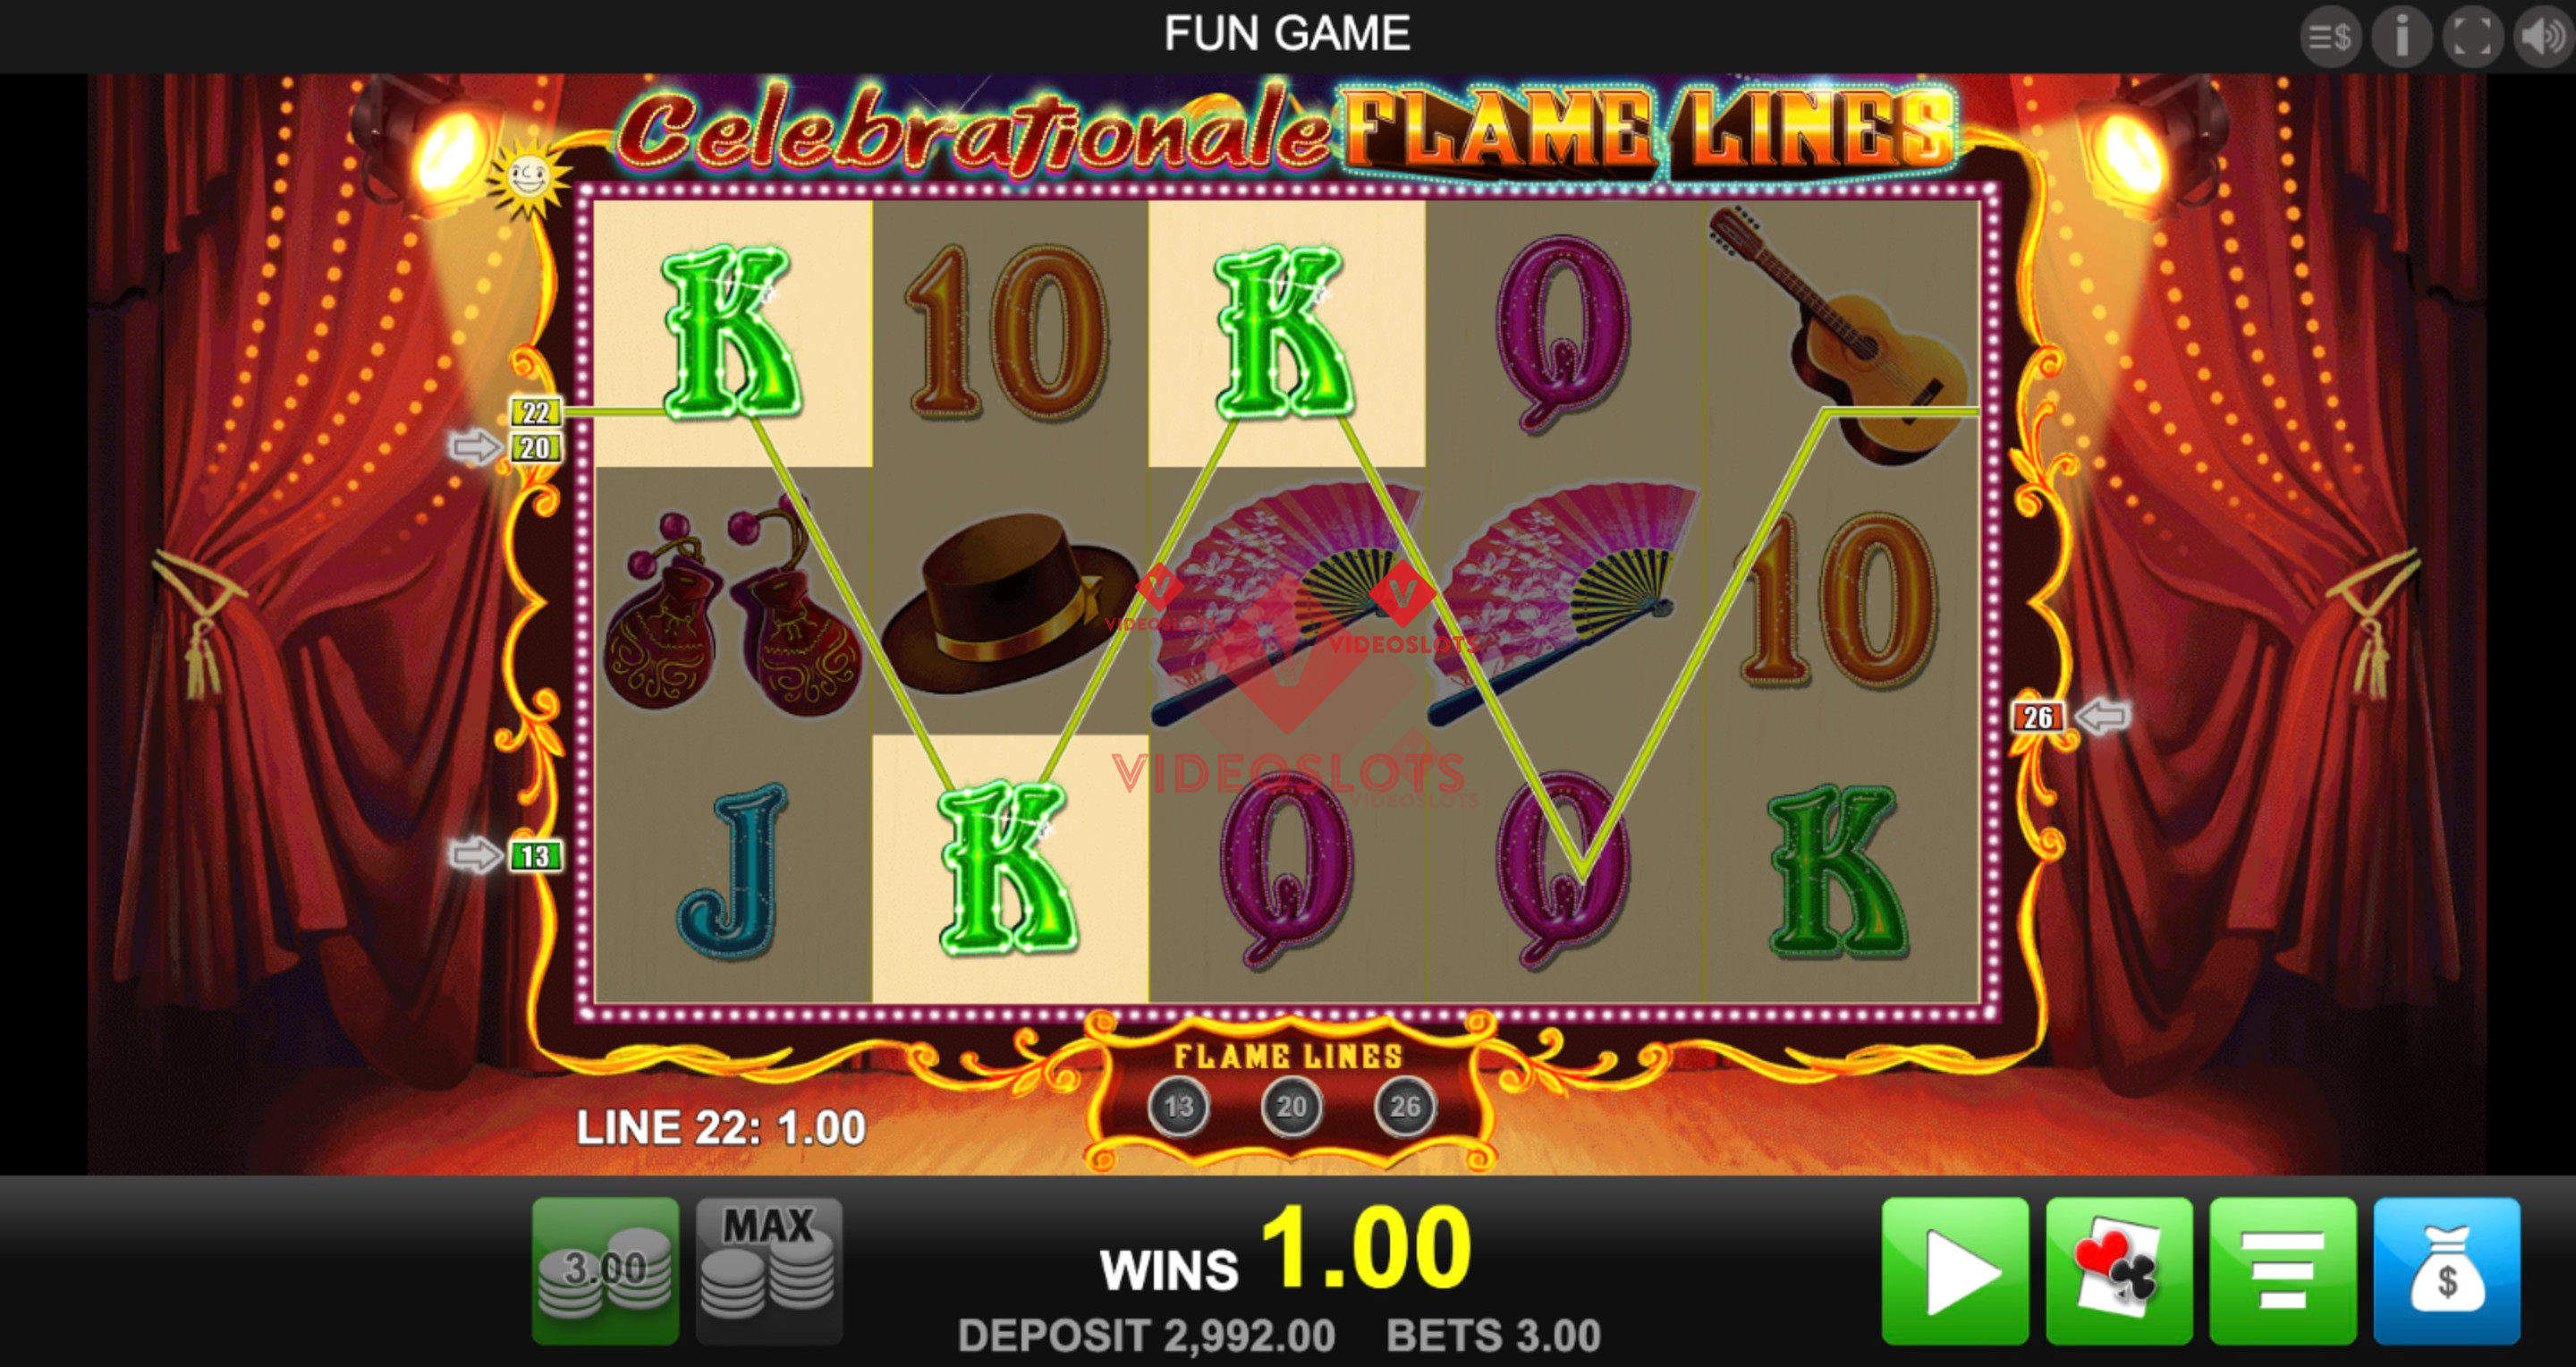 Base Game for Celebrationale Flame Lines slot from Merkur